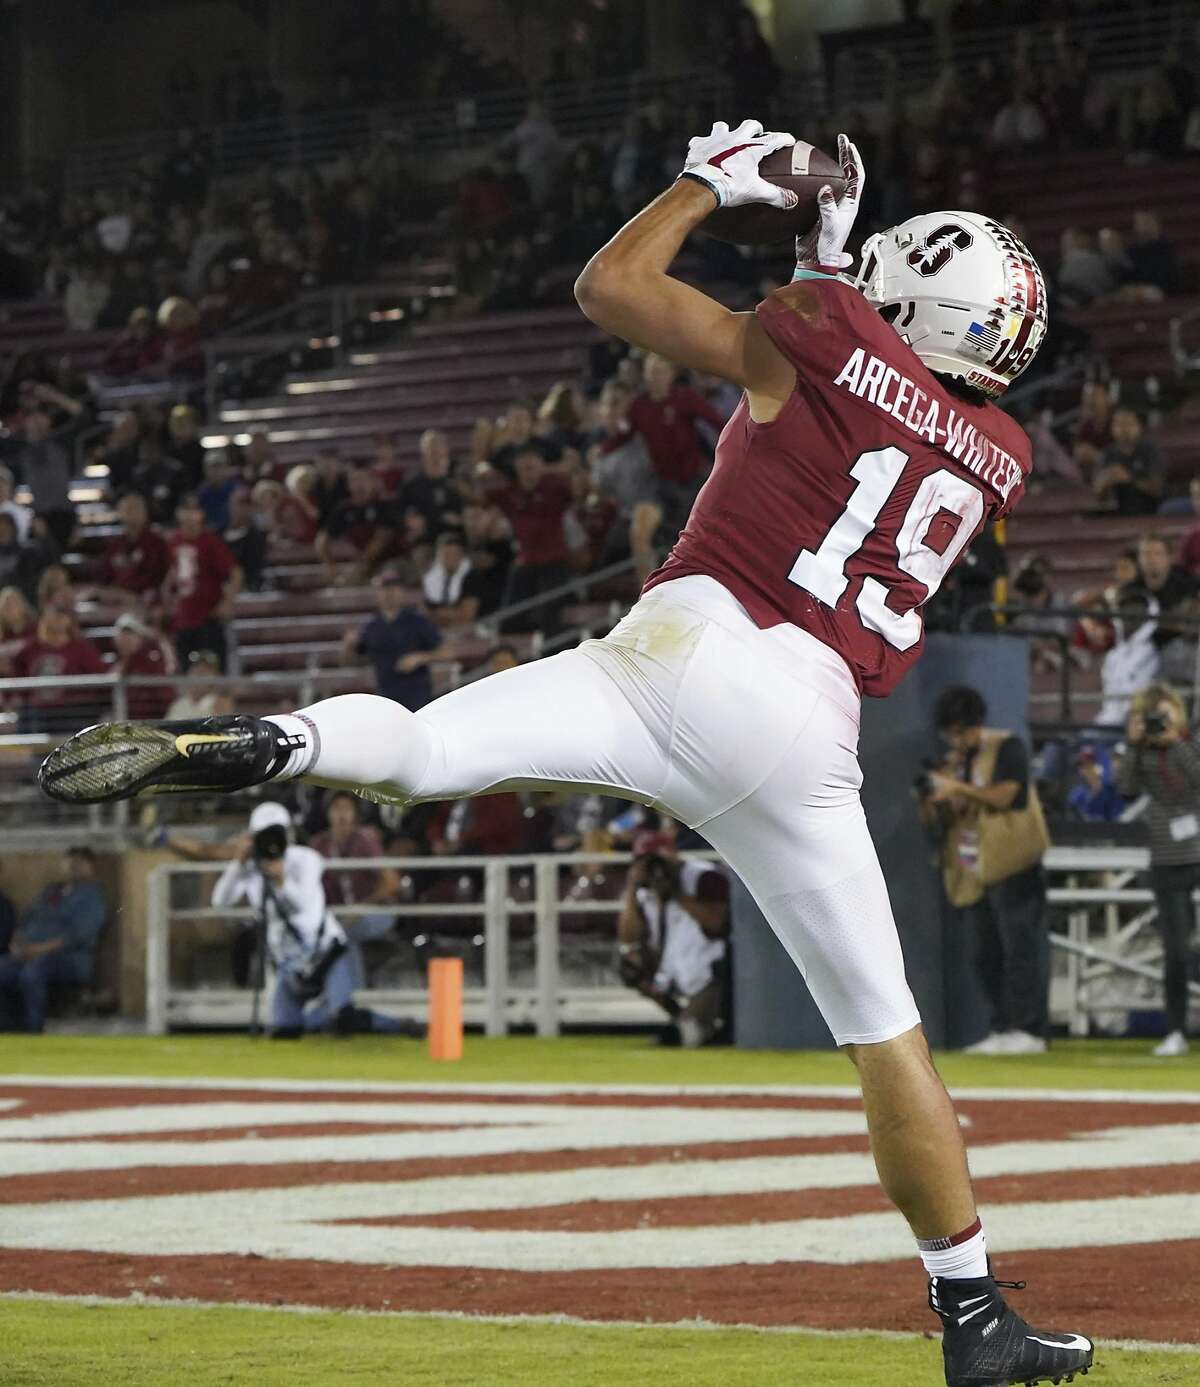 Stanford wide receiver JJ Arcega-Whiteside scores a touchdown in the second half against Washington State during an NCAA college football game on Saturday, Oct. 27, 2018, in Stanford, Calif. (AP Photo/Don Feria)